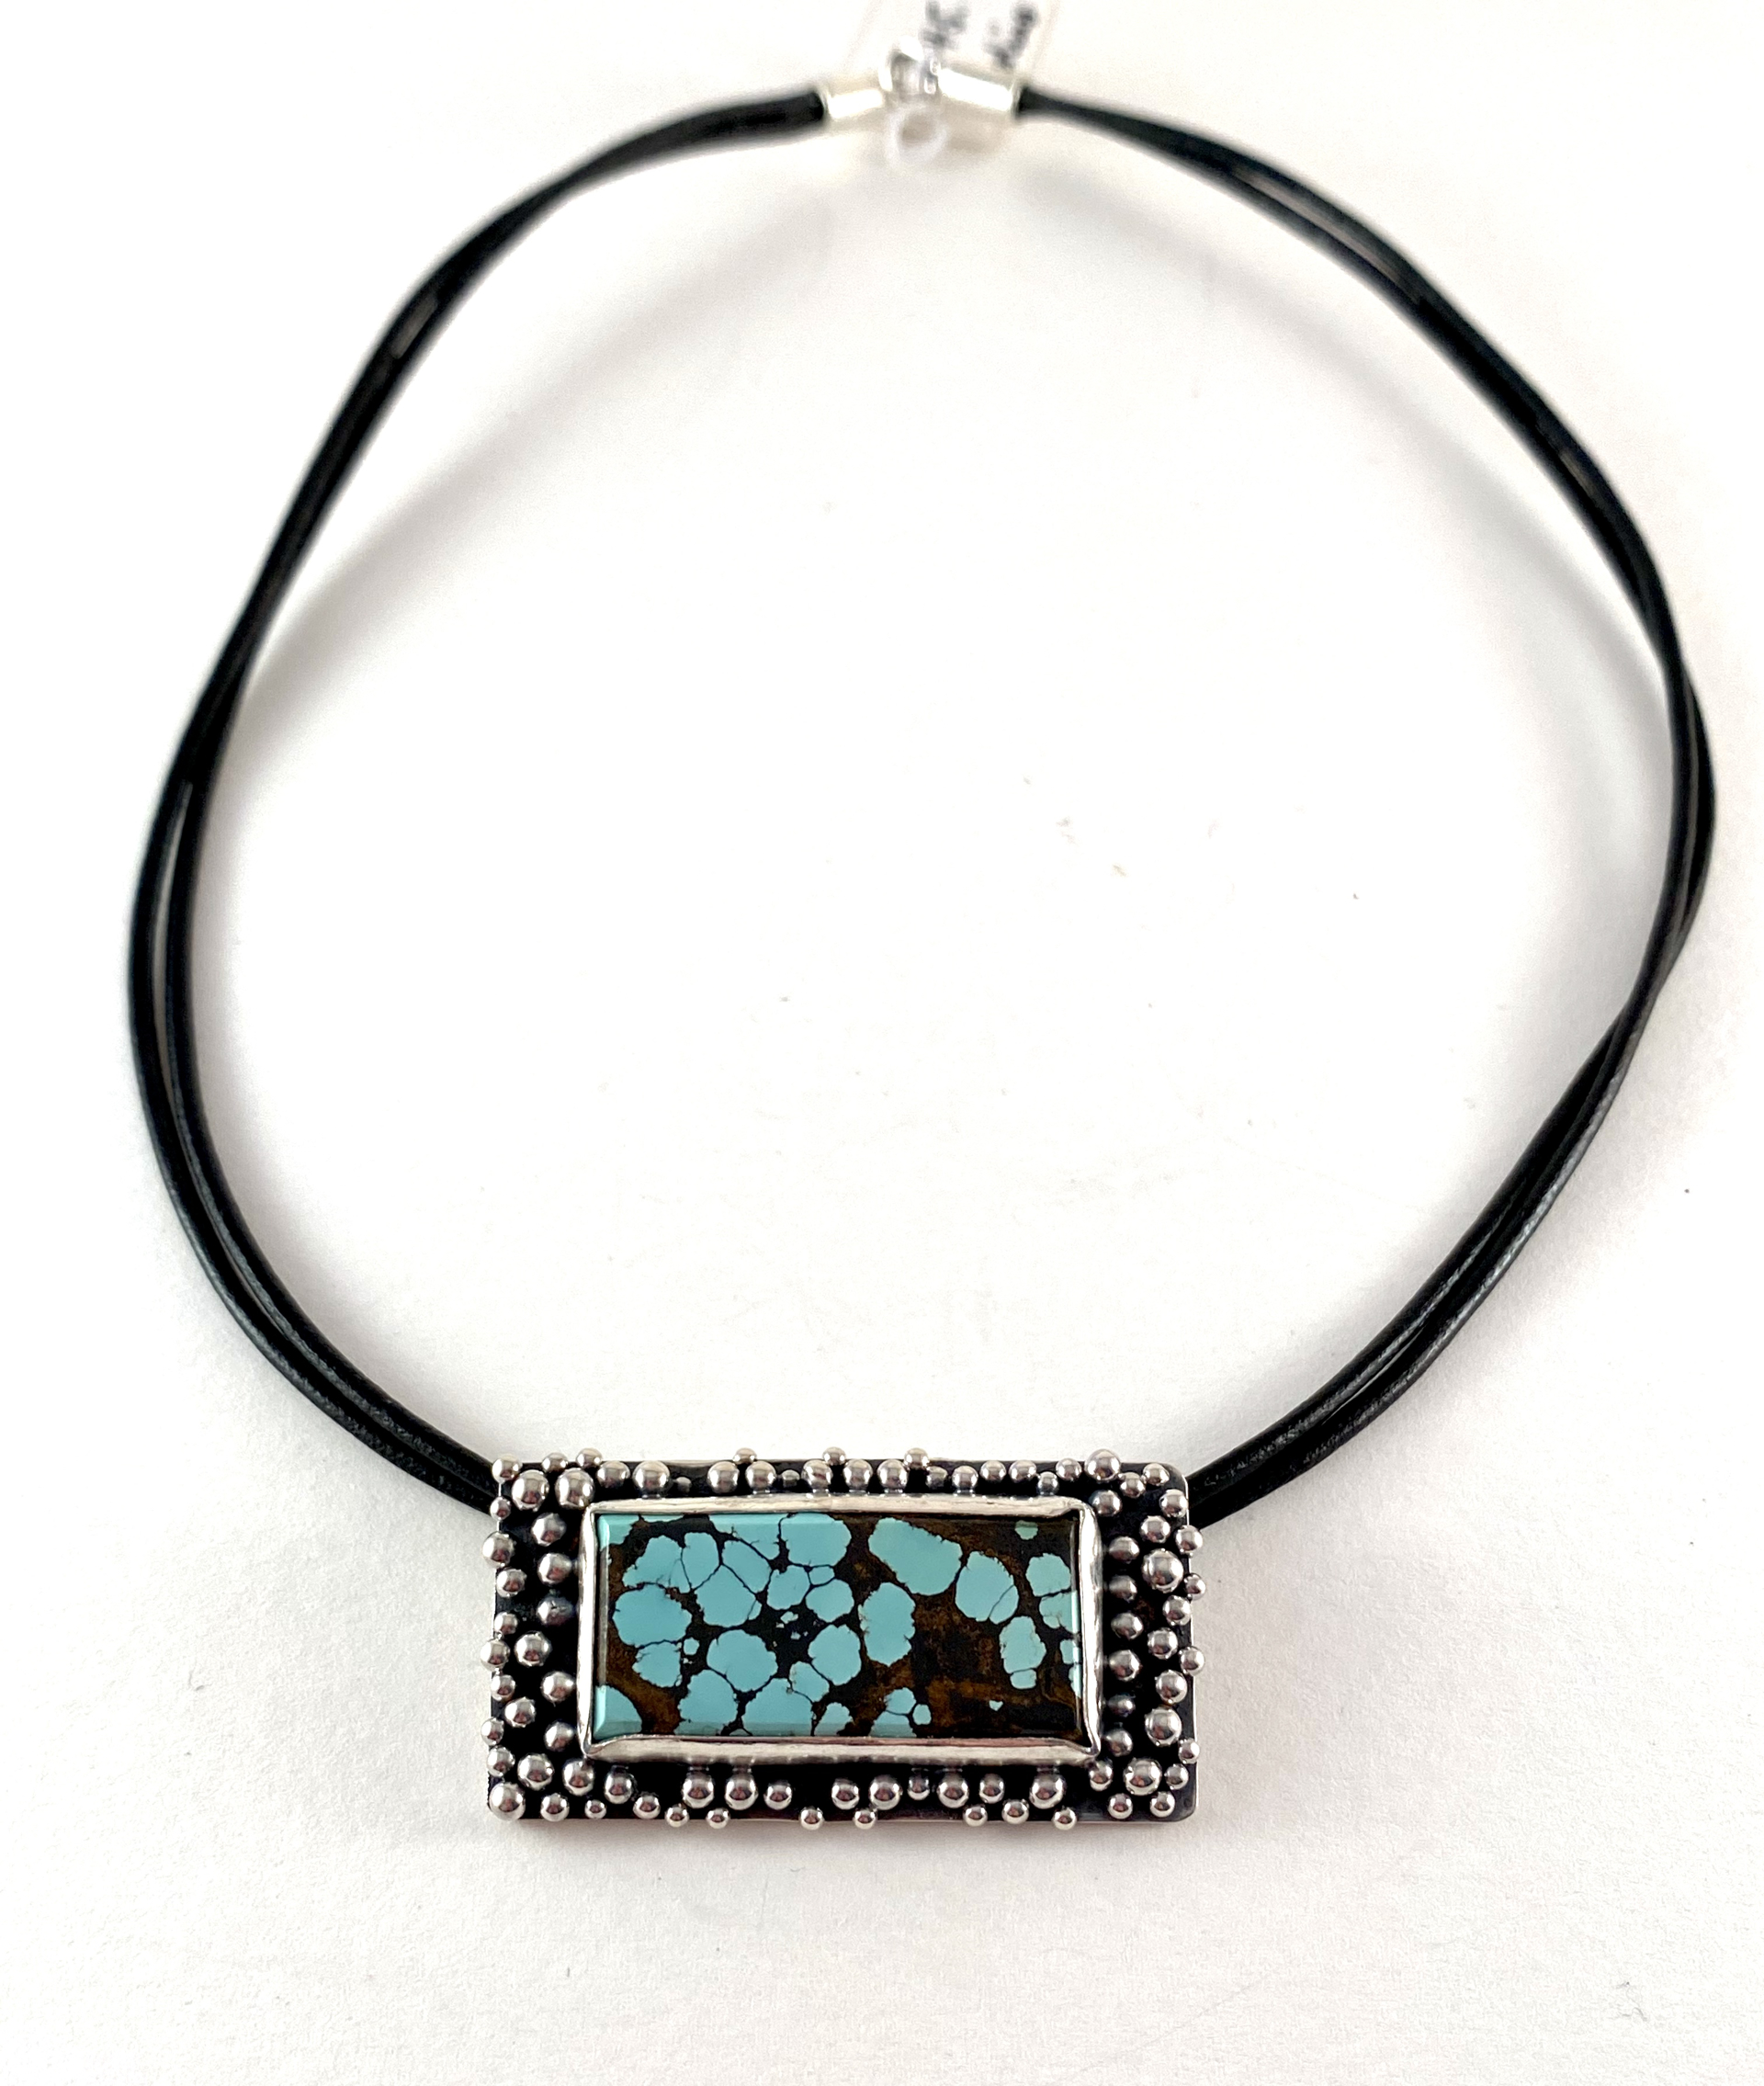 #131 Silver, Turquoise Pendant on double leather cord by Anne Bivens